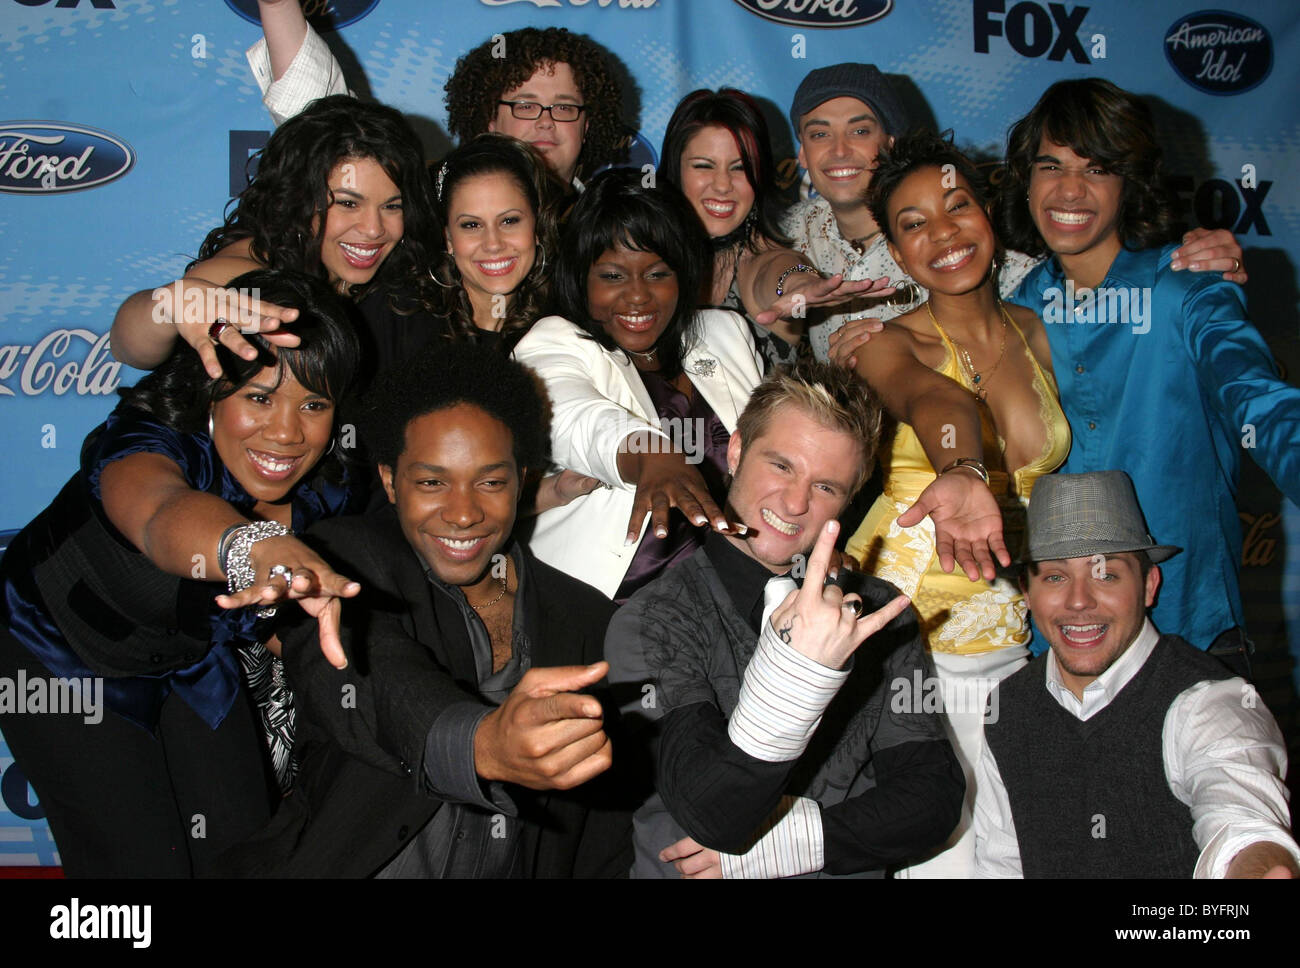 Top 12 American Idol Contestants American Idol Top 12 Party - Season 6 at  the Astra West Pacific Design Center Los Angeles Stock Photo - Alamy